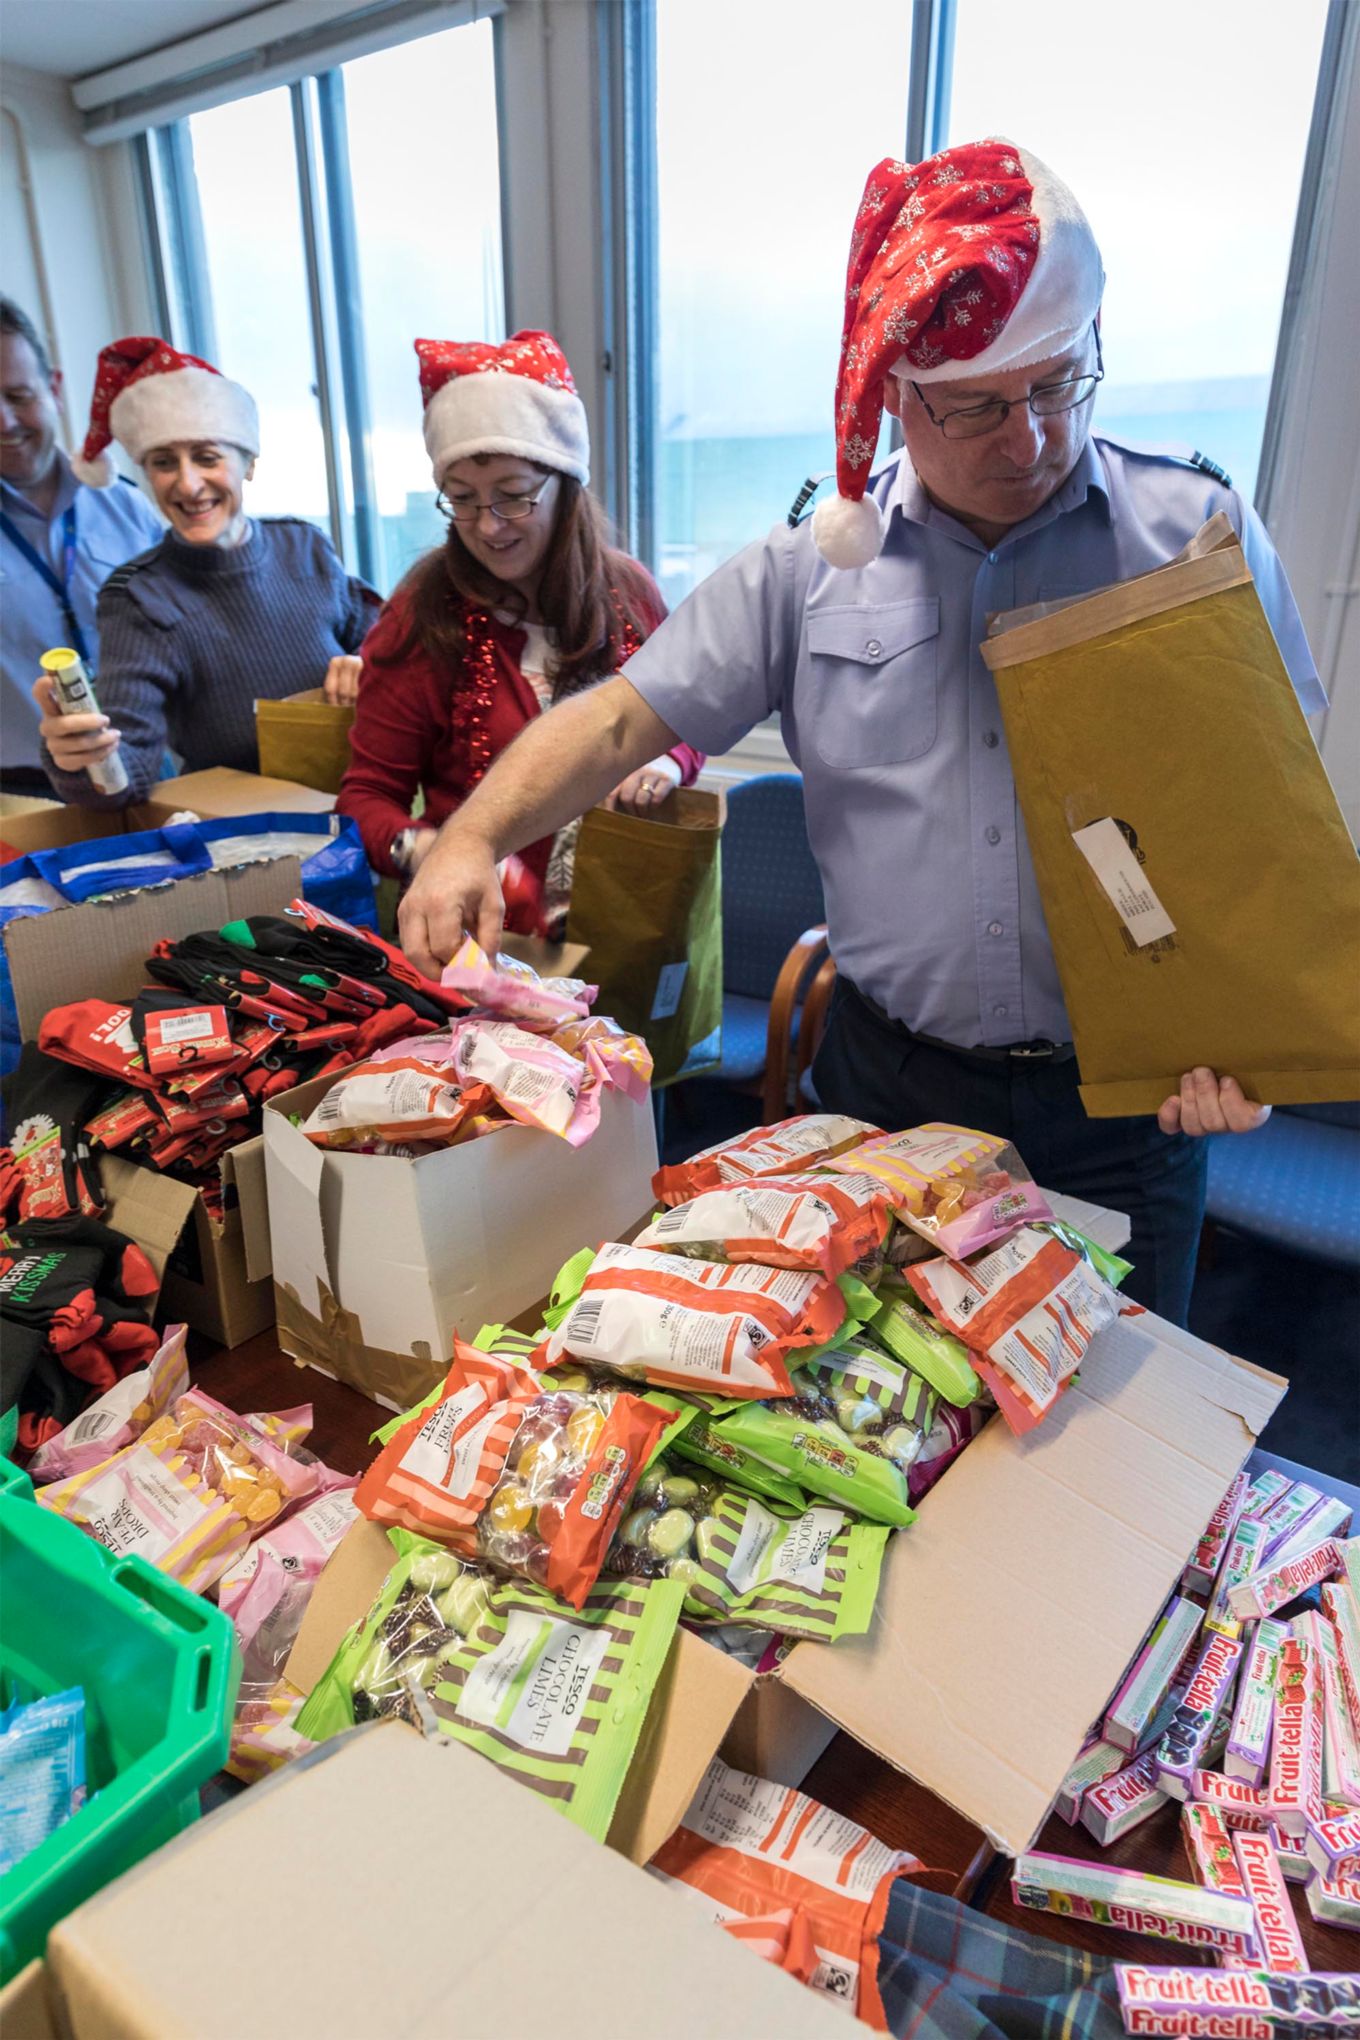 RAF personnel pack Christmas gifts